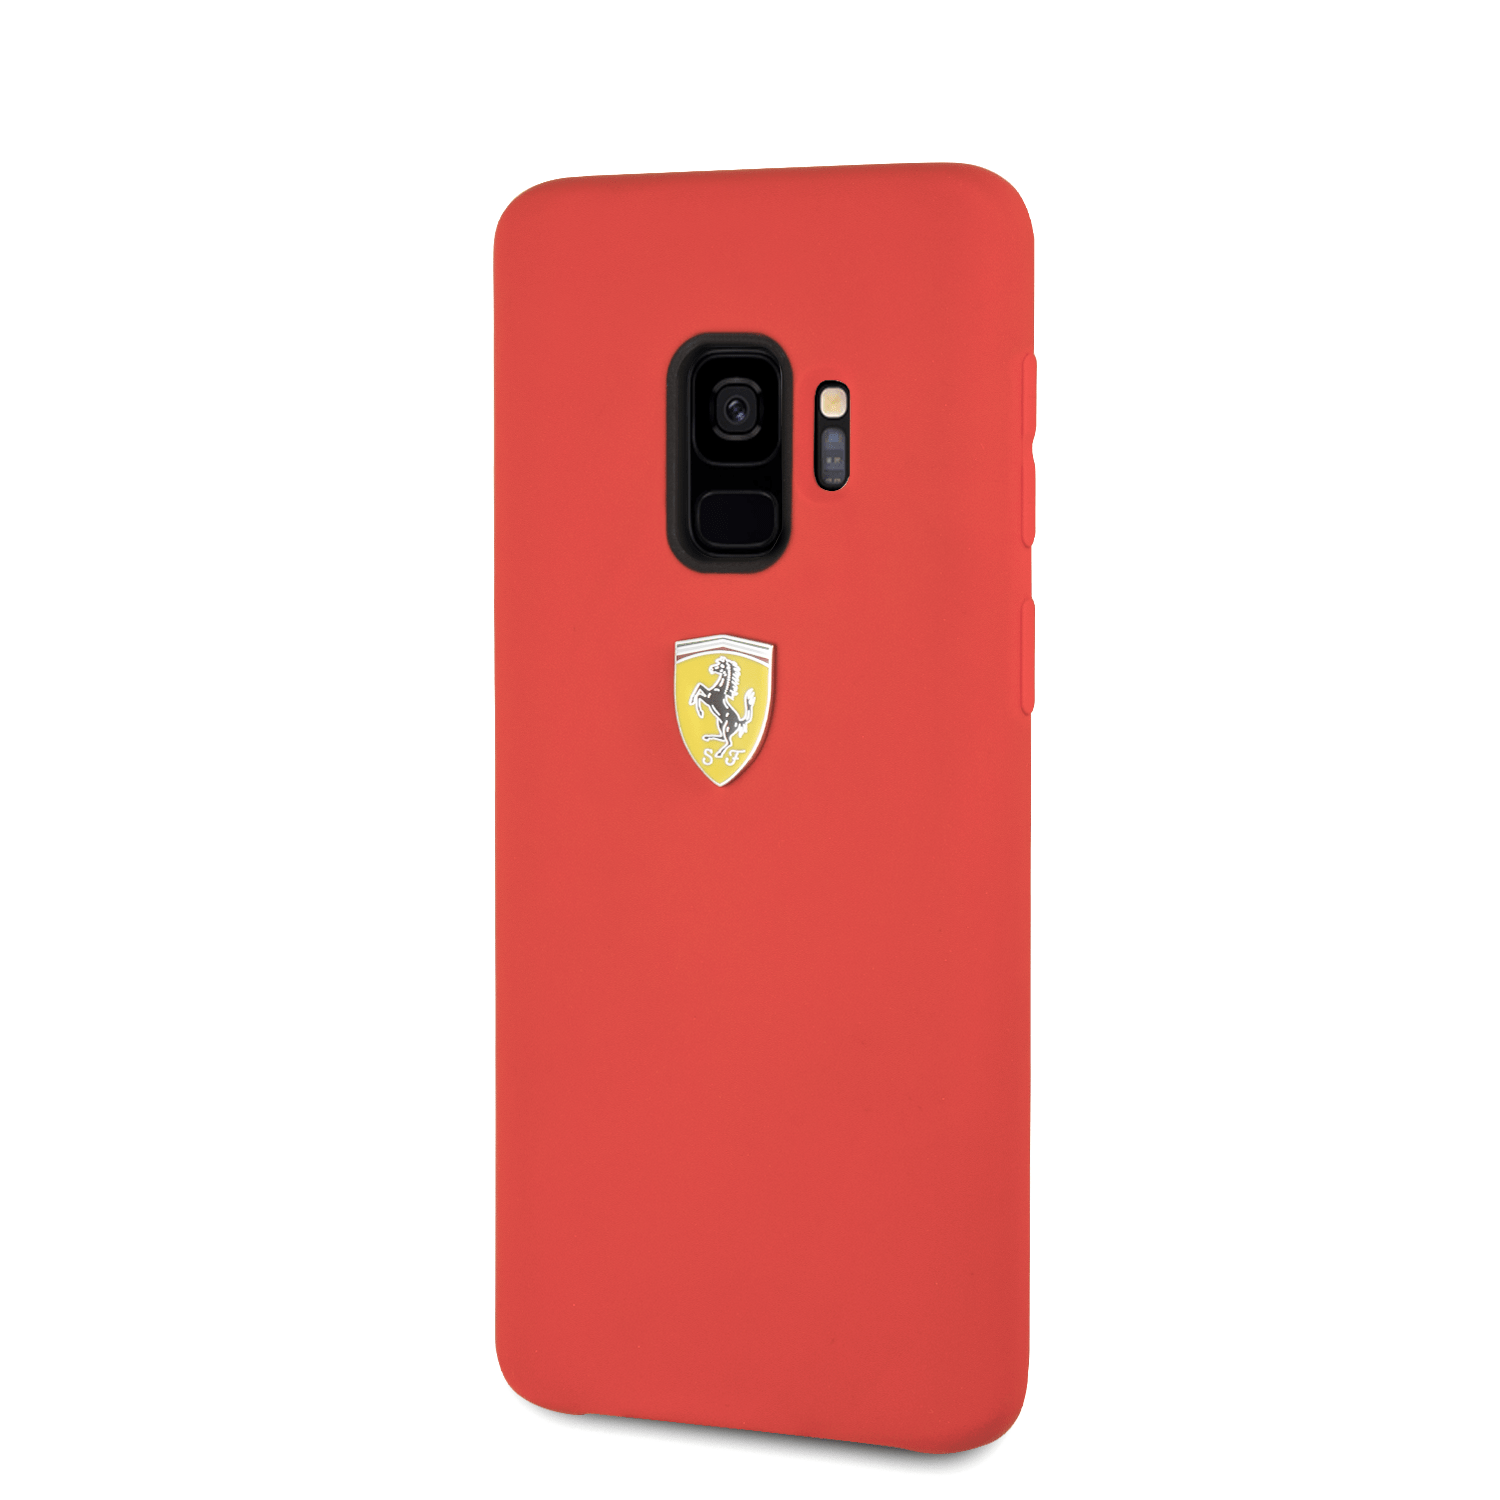 Silicon Case for Galaxy S9 Red Color